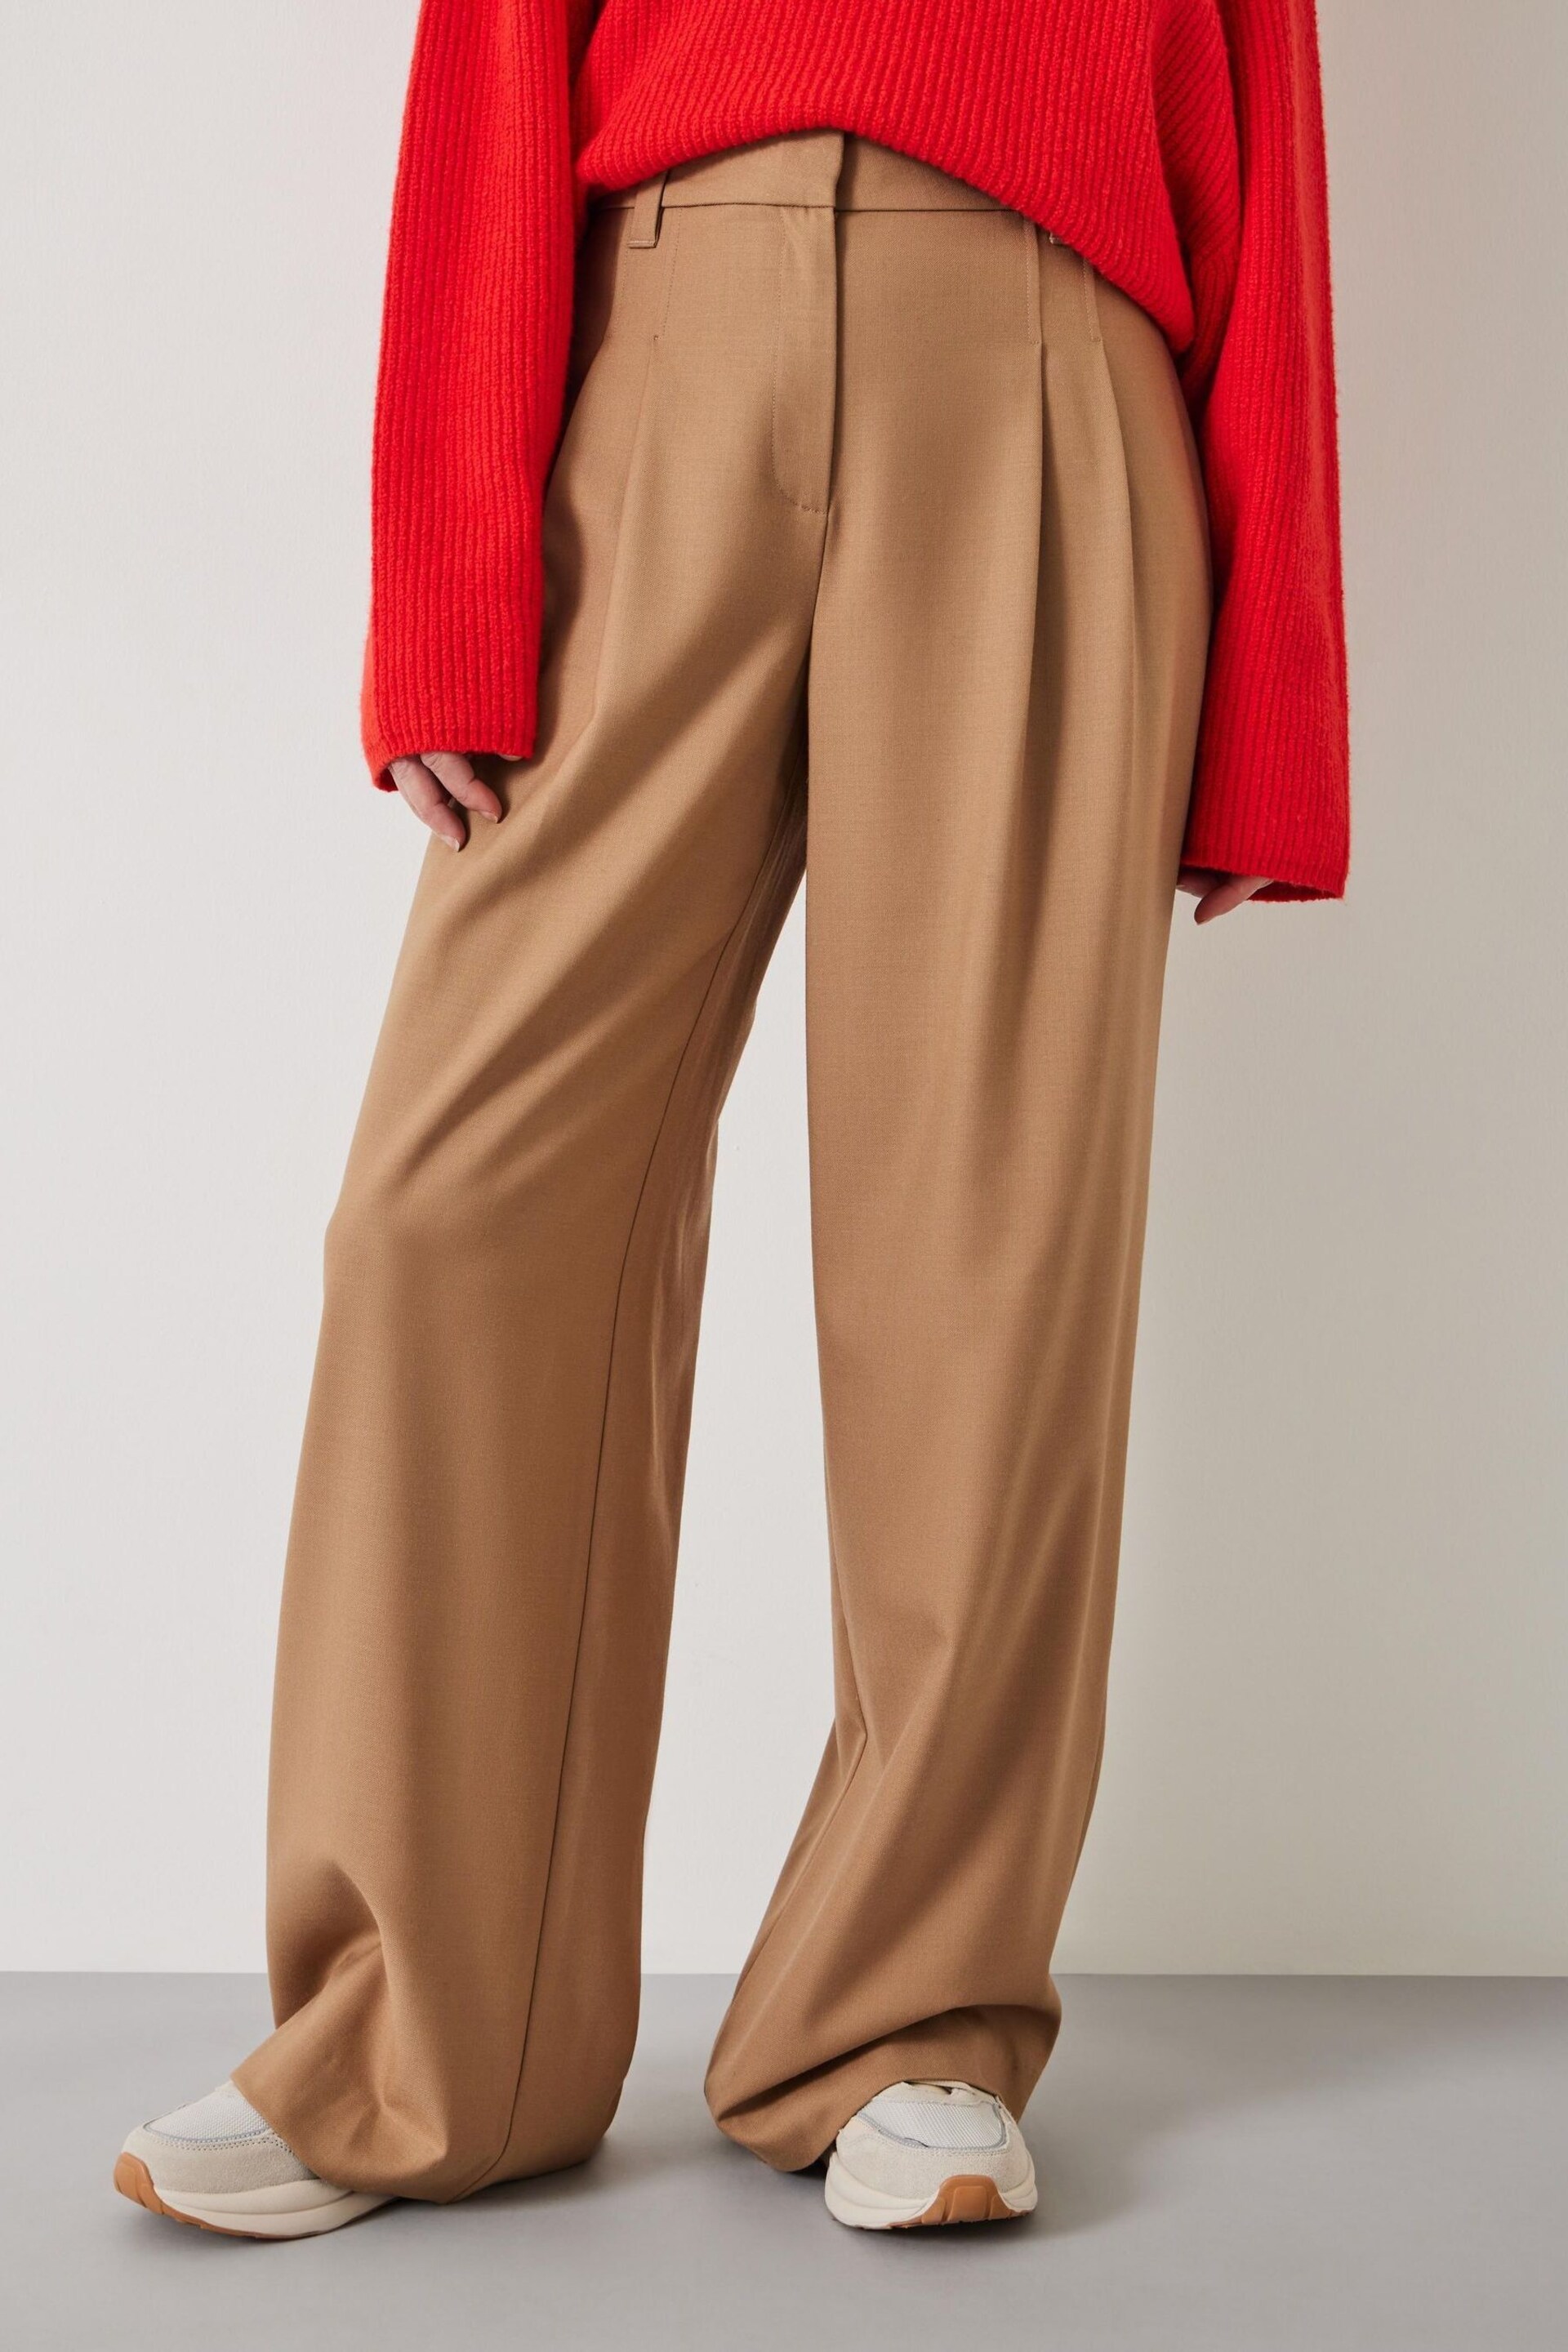 Hush Brown Aoife High Waist Trousers - Image 1 of 5